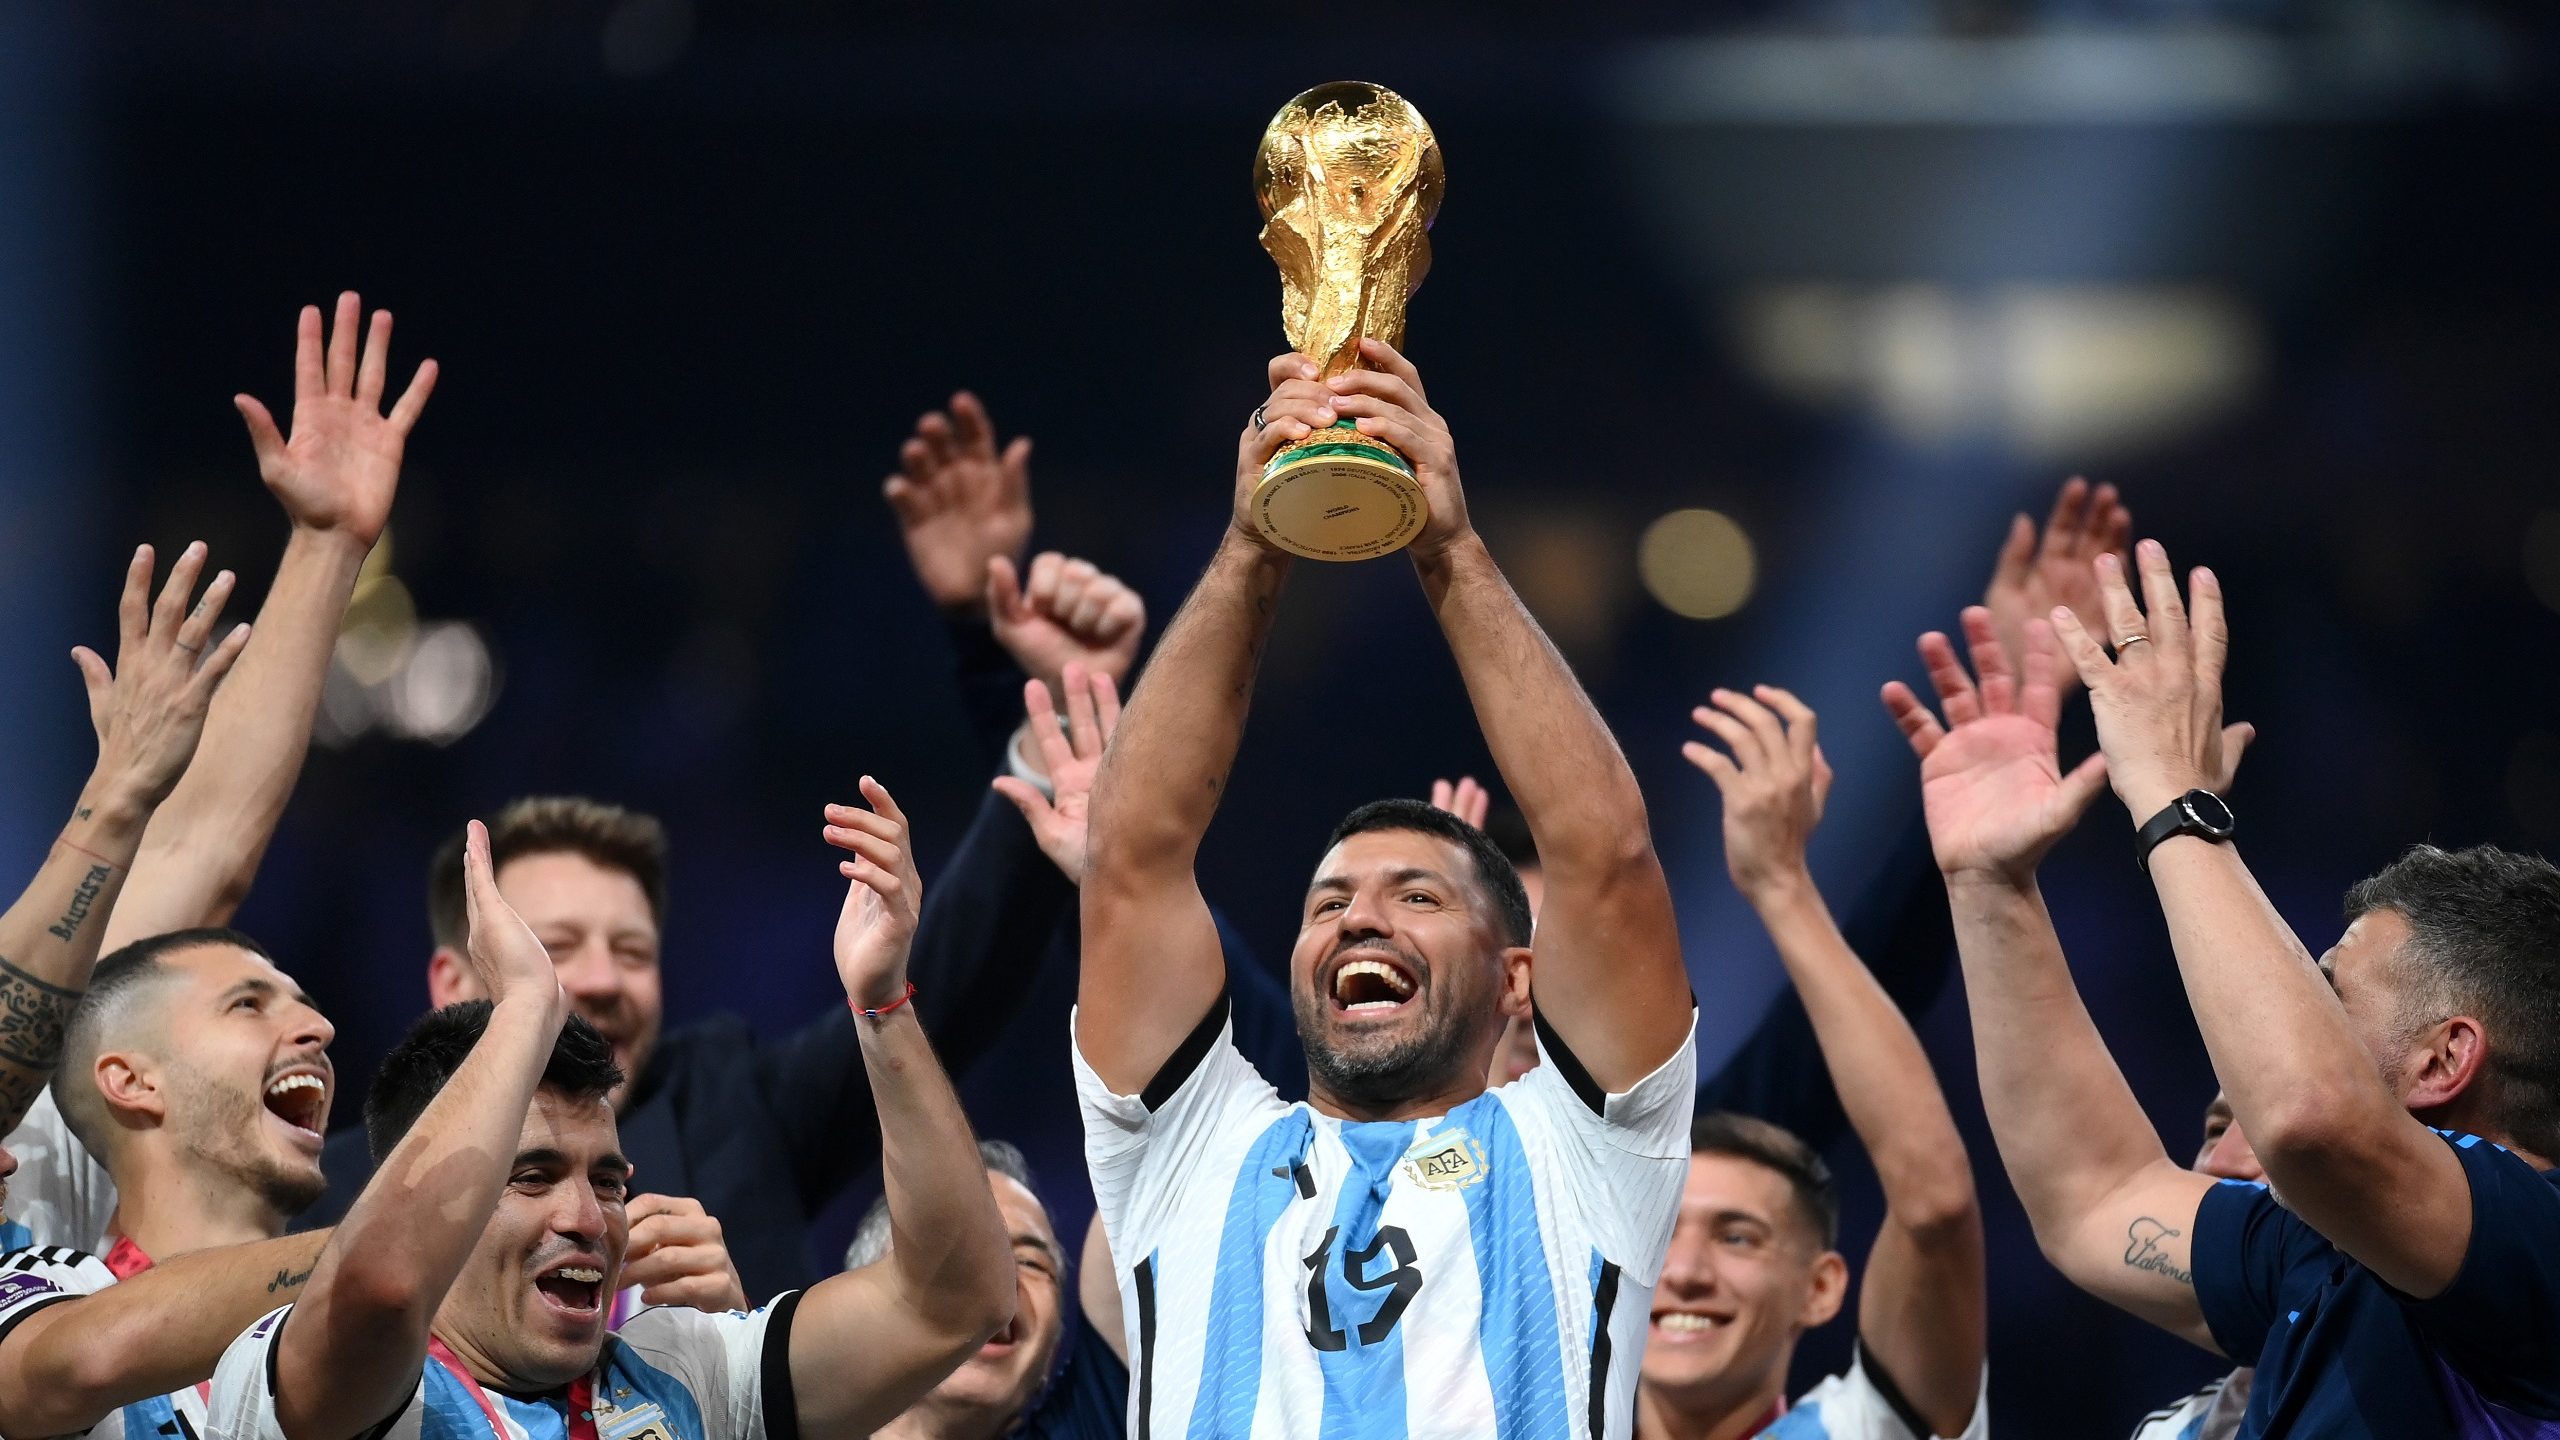 Argentina Wins World Cup Final, Beating France on Penalties